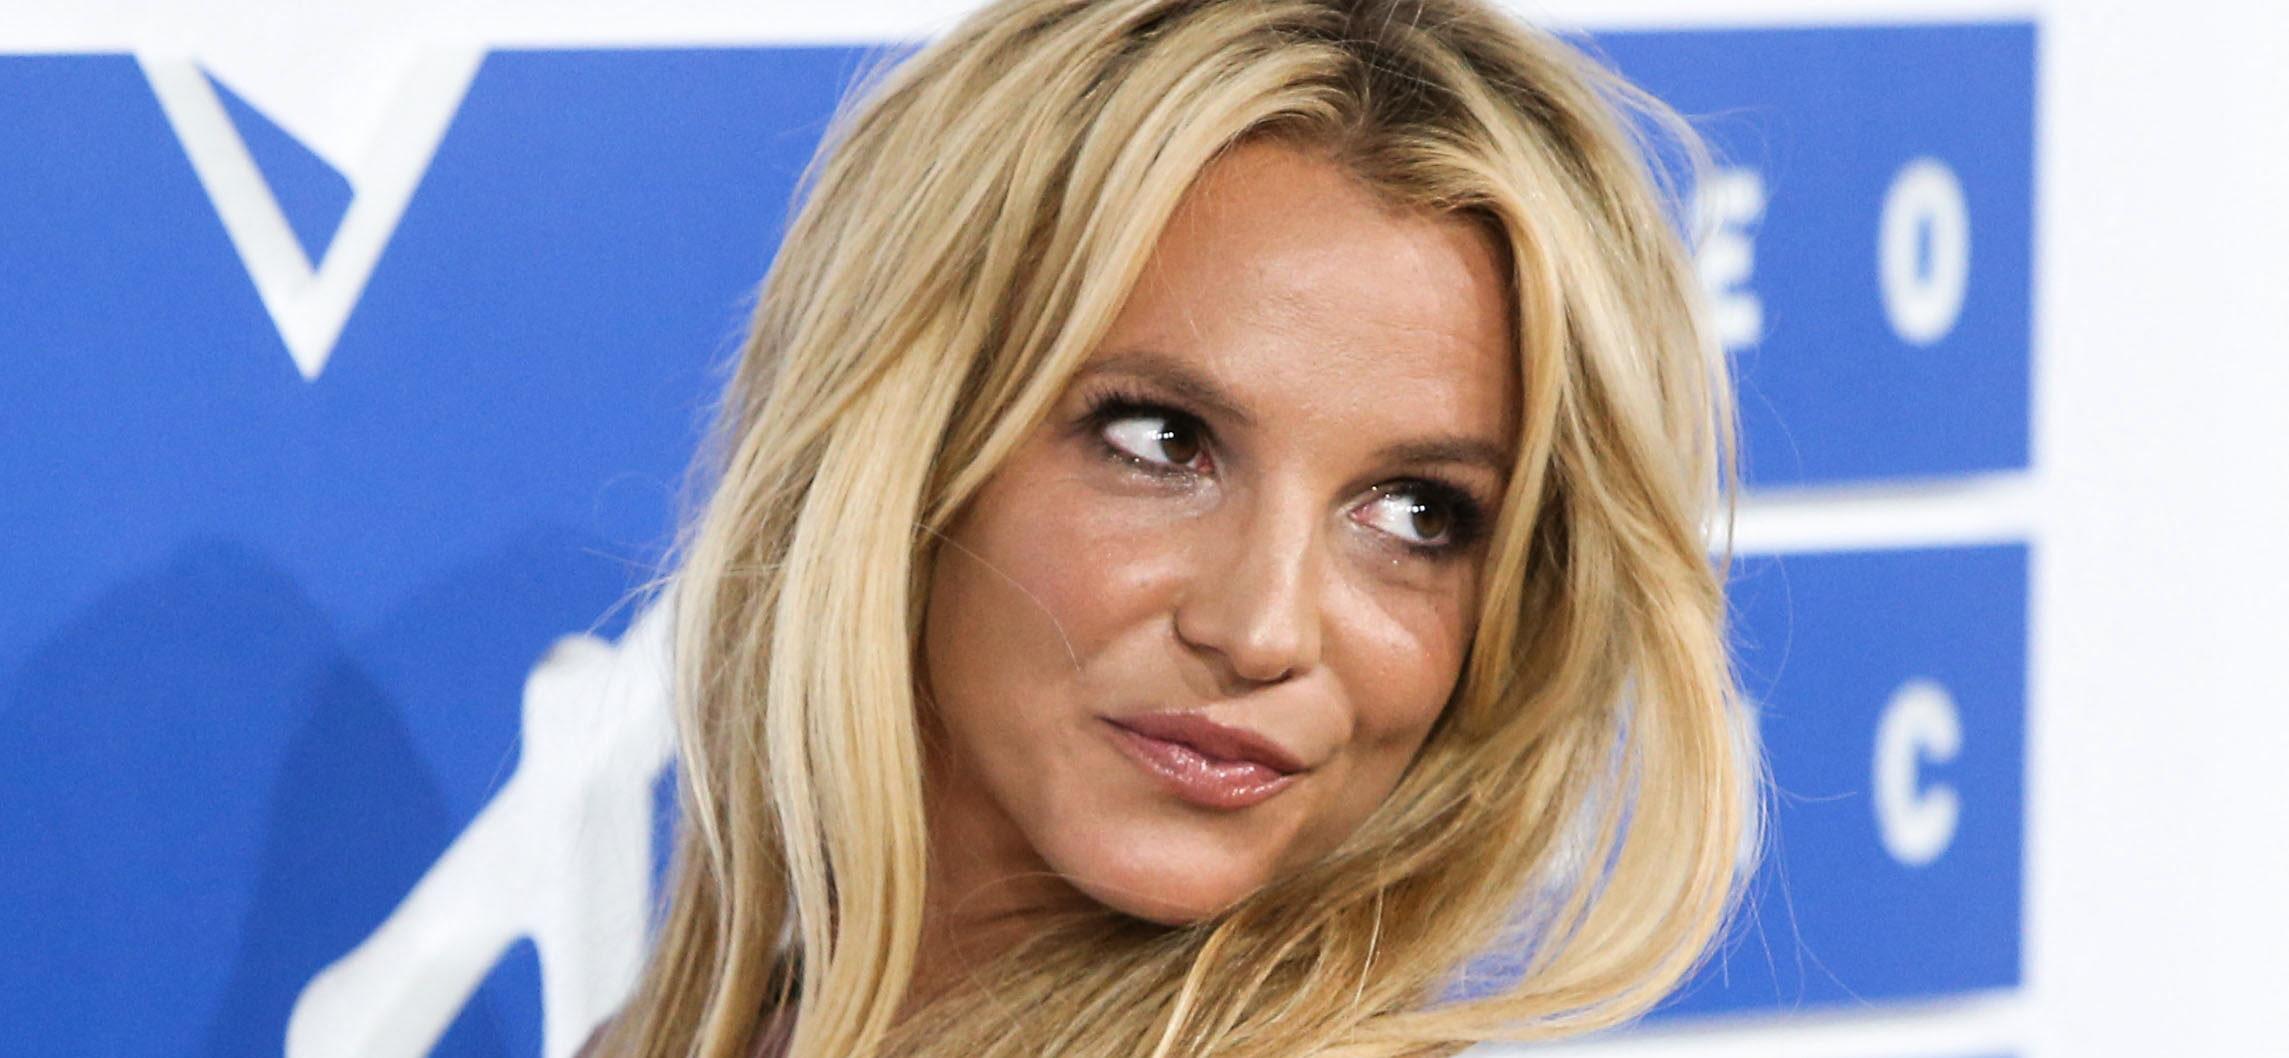 Britney Spears Slams ‘Trash’ News She’s Working On A New Album